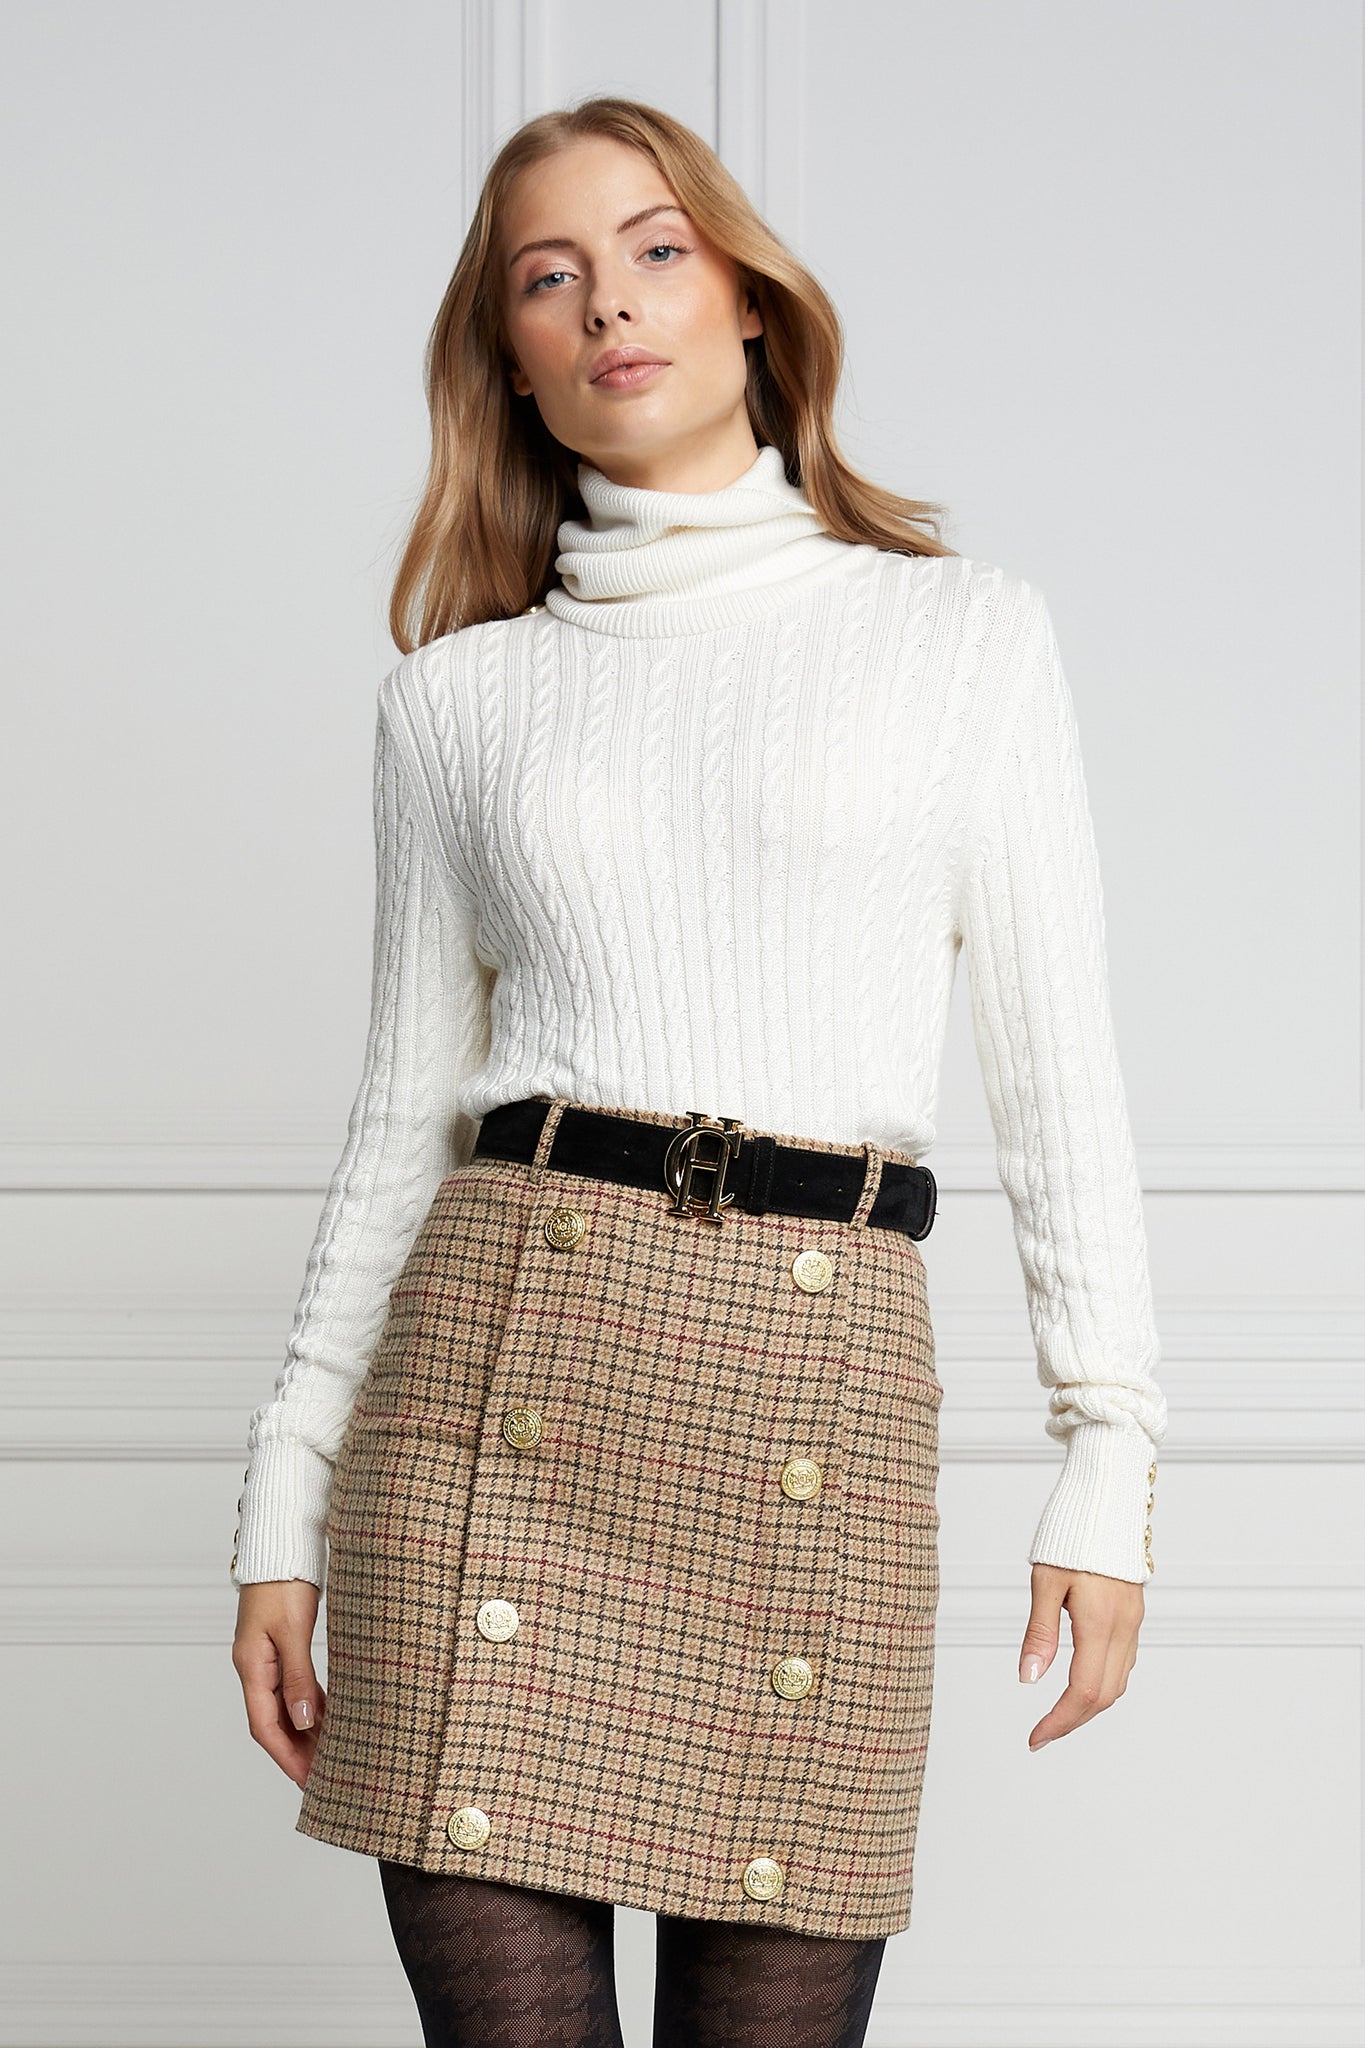 womens wool pencil mini skirt in light brown and red tweed check with concealed zip fastening on centre back and gold rivets down front